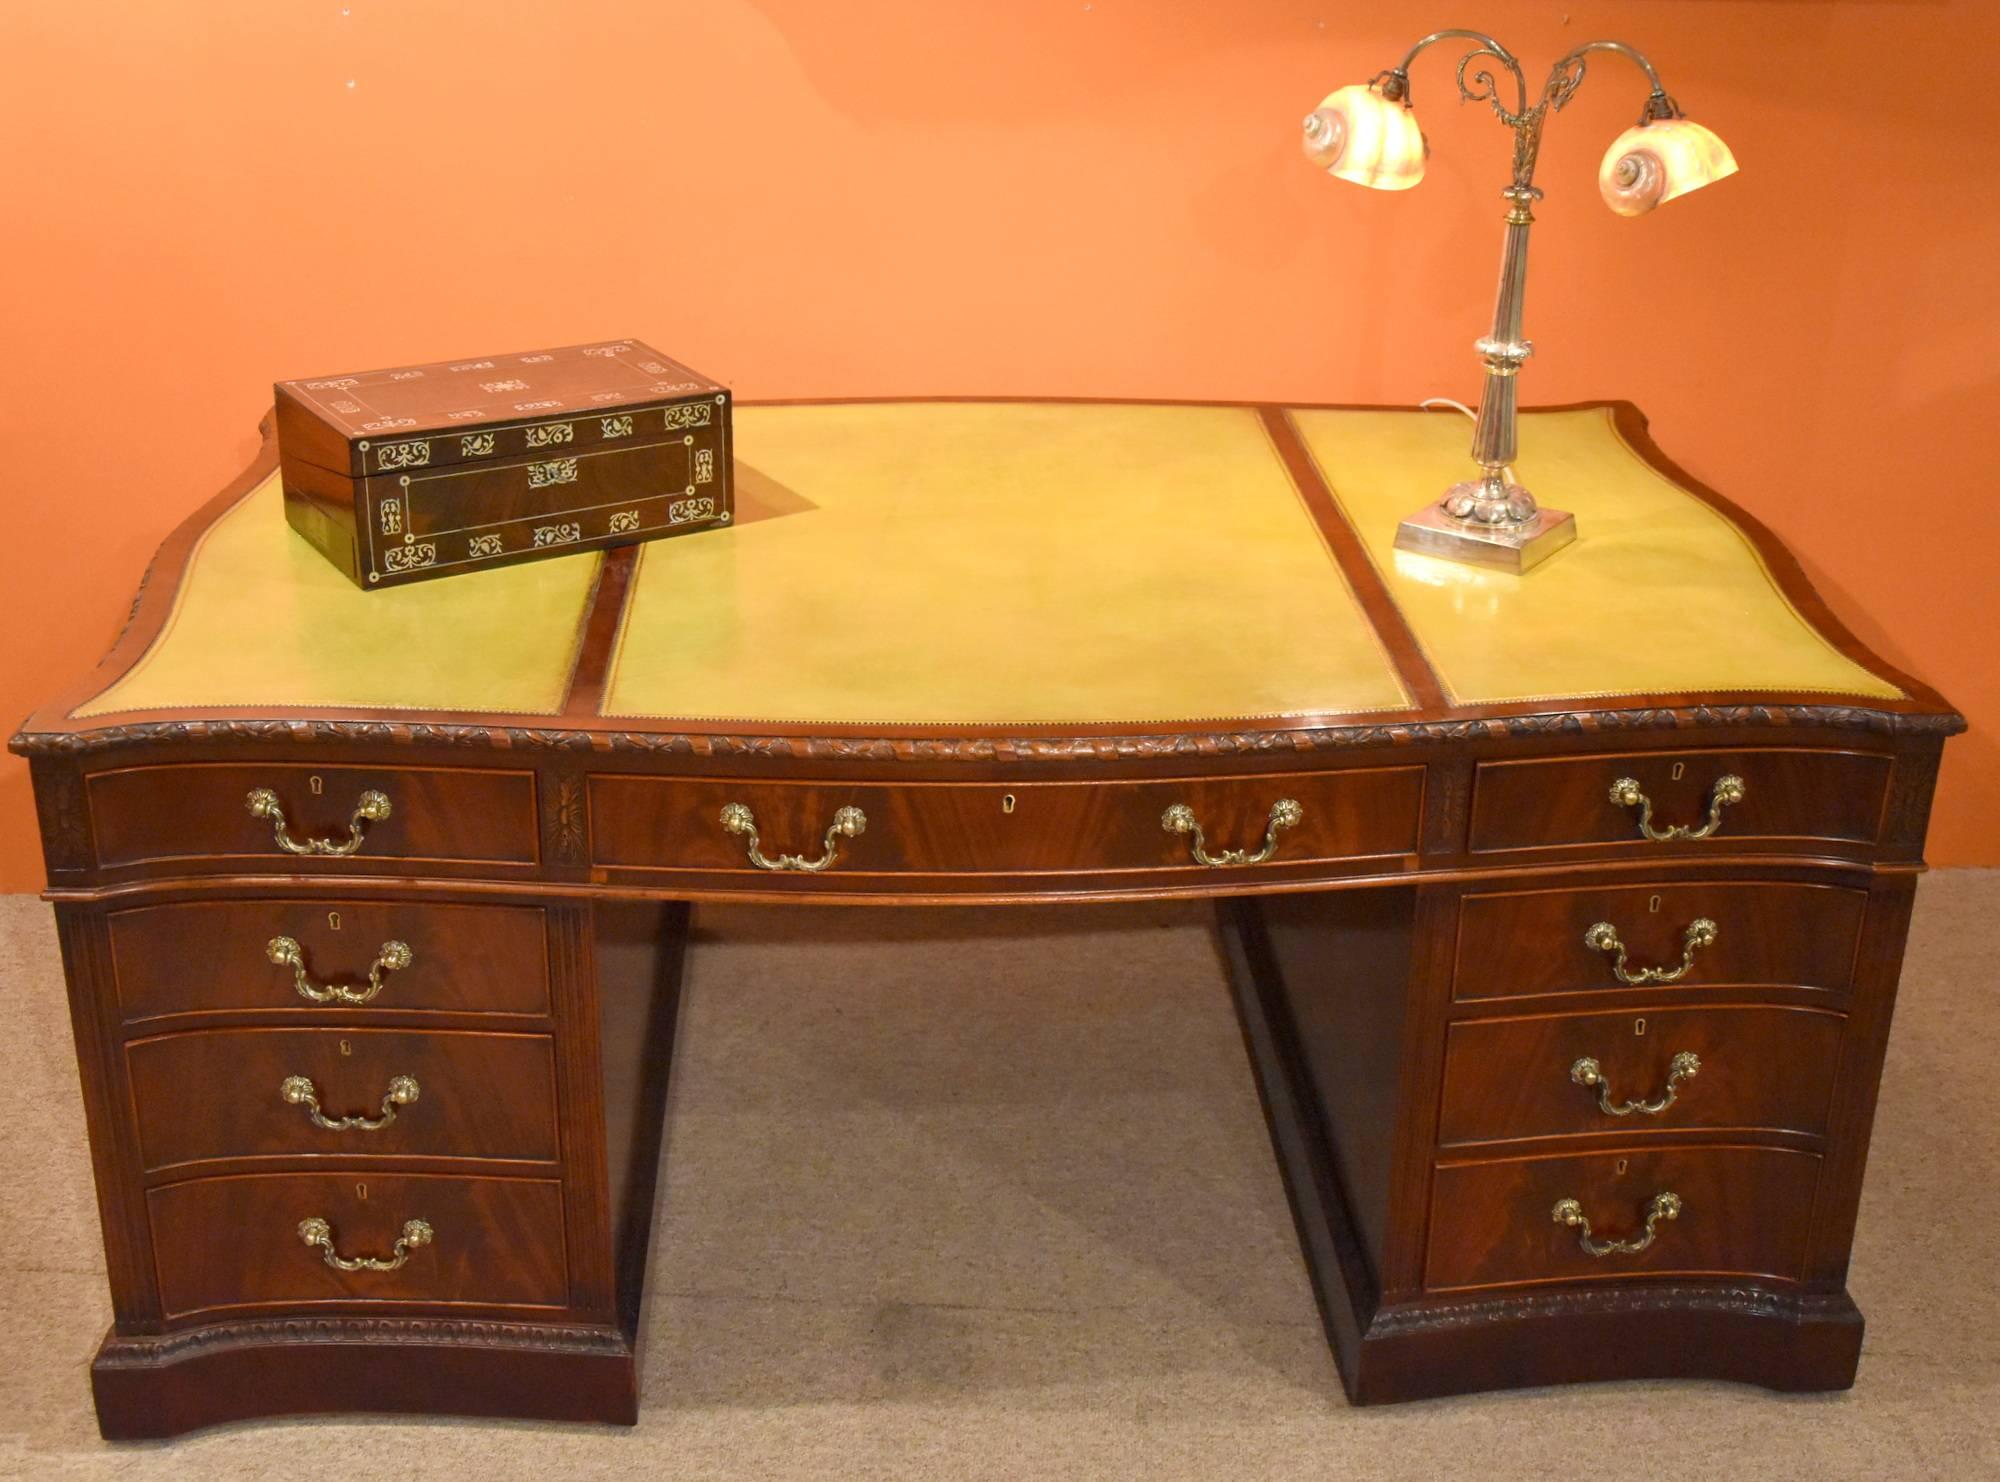 George III style mahogany serpentine partners desk a rare and impressive large mahogany serpentine shaped pedestal partners desk in the manner of Thomas Chippendale. The recently triple panel light green leather inset top sits above an arrangement